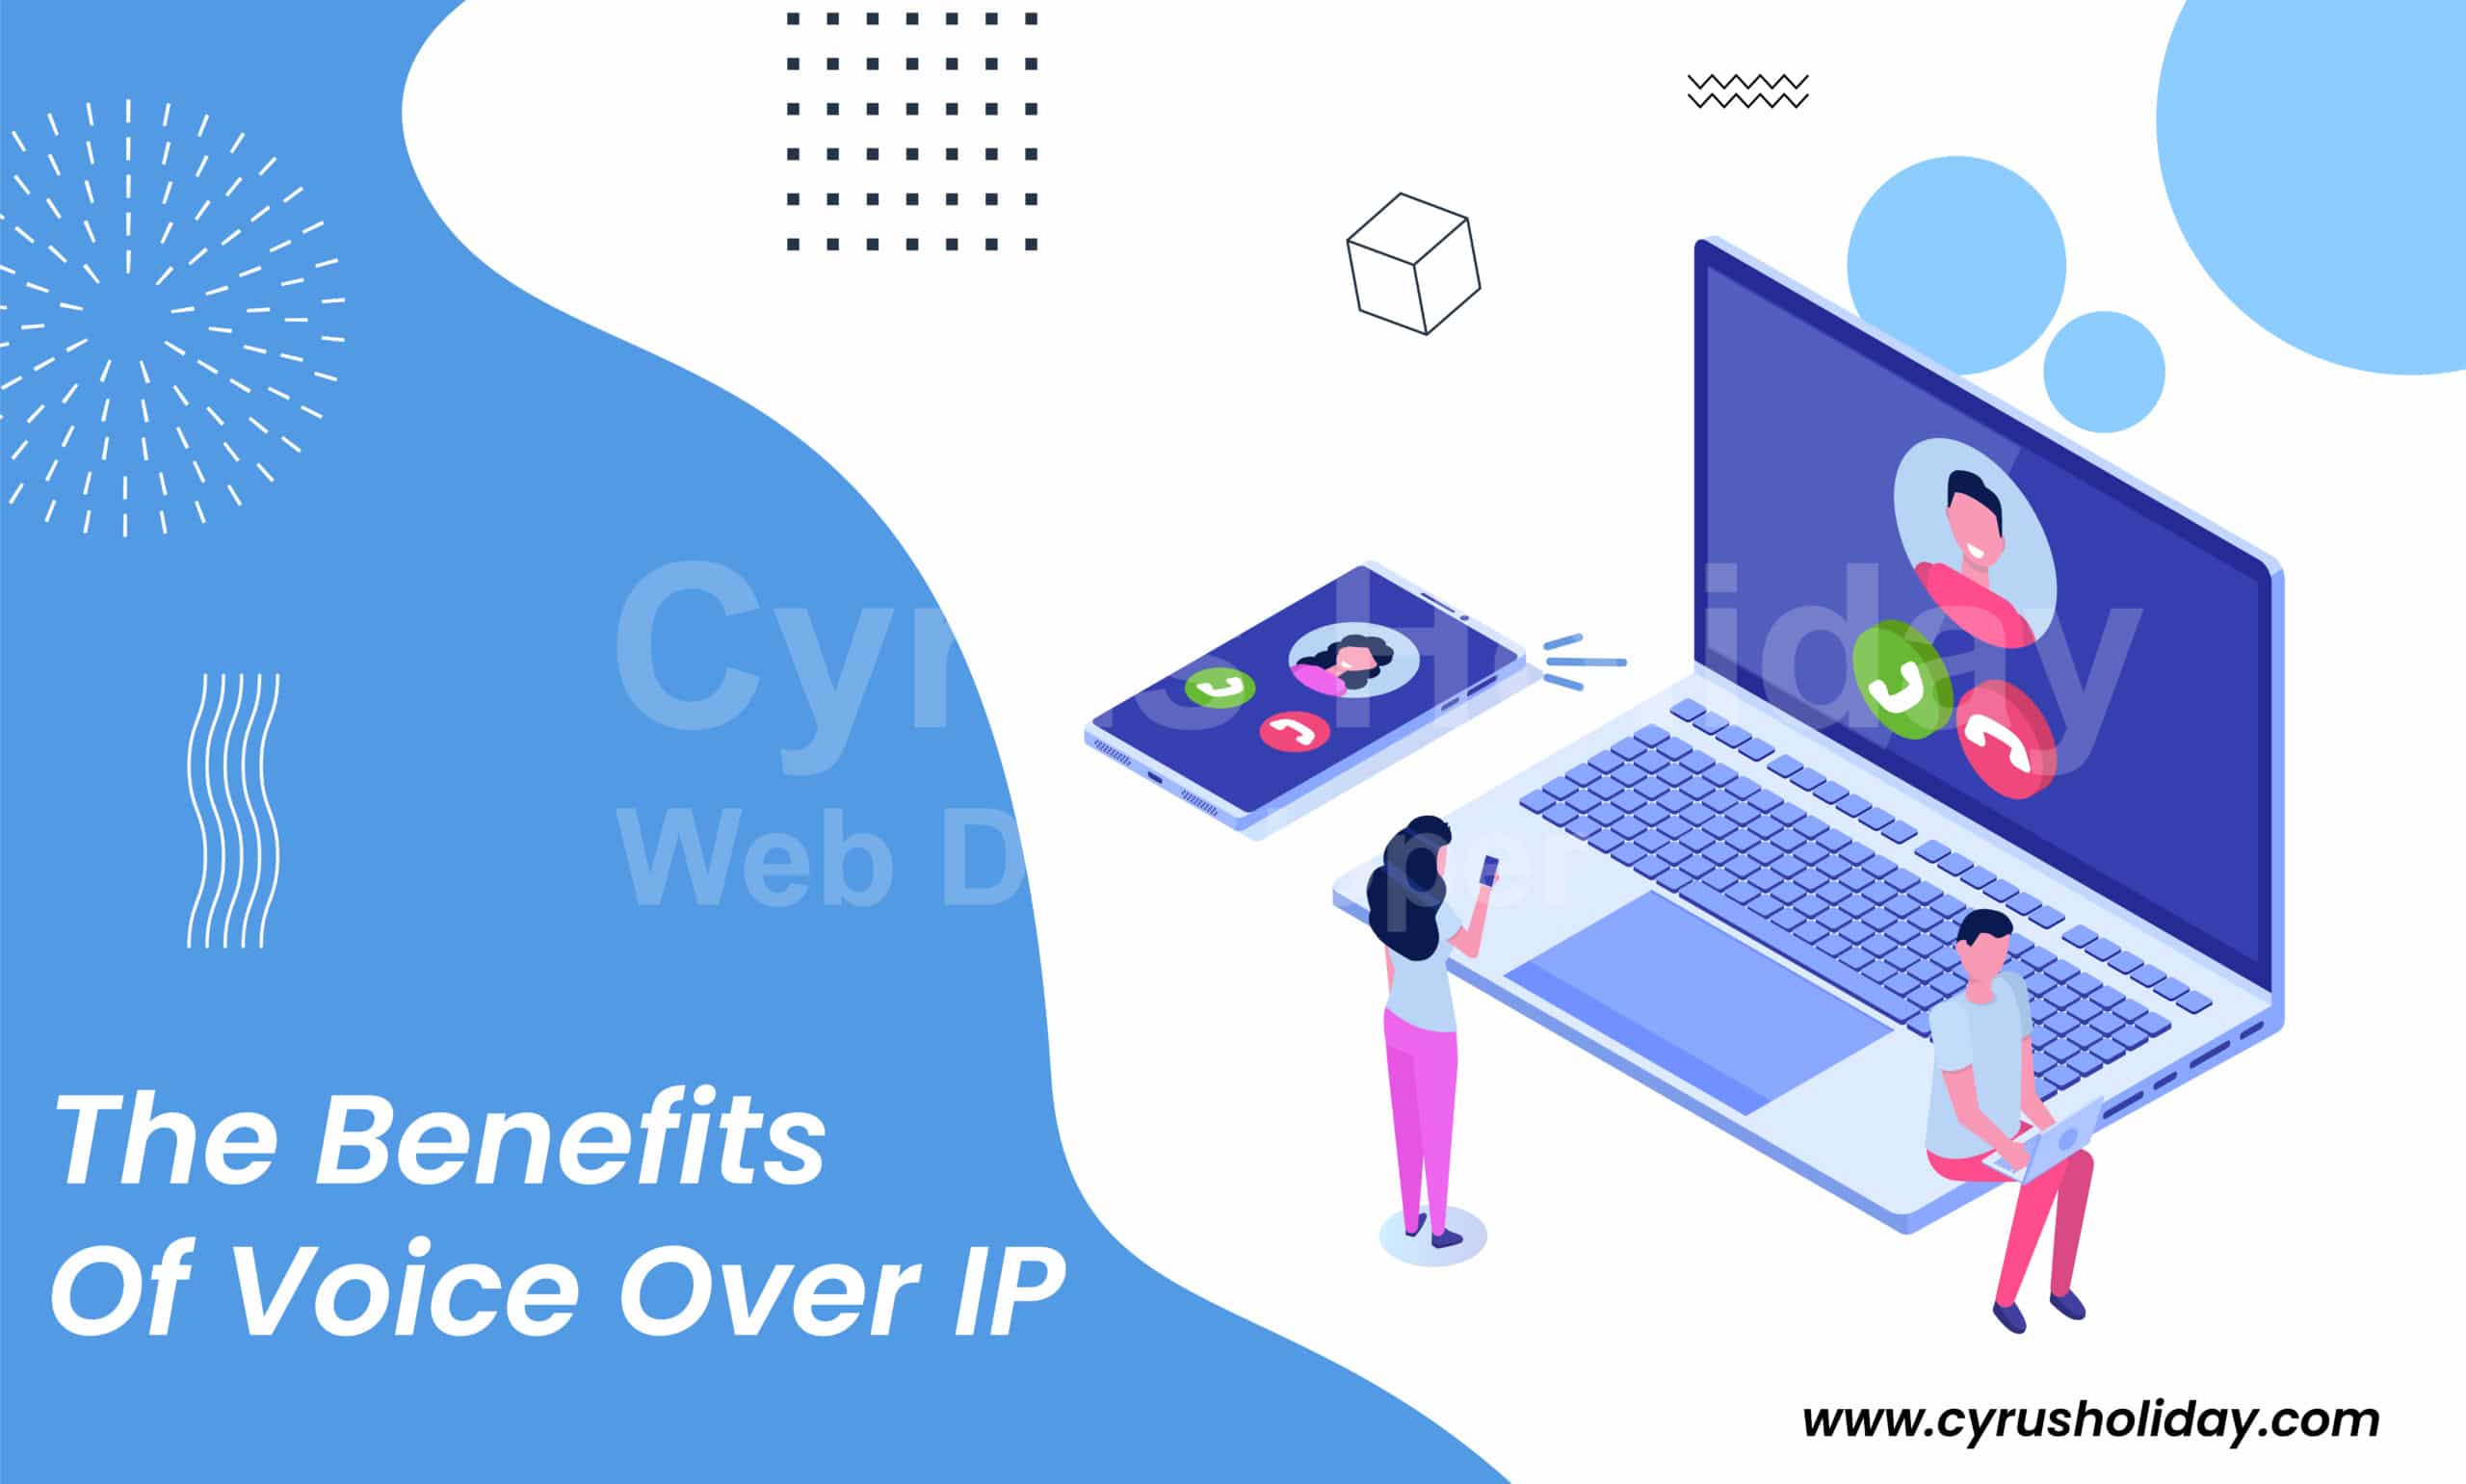 Cost To Uptake The Benefits Of VoIP